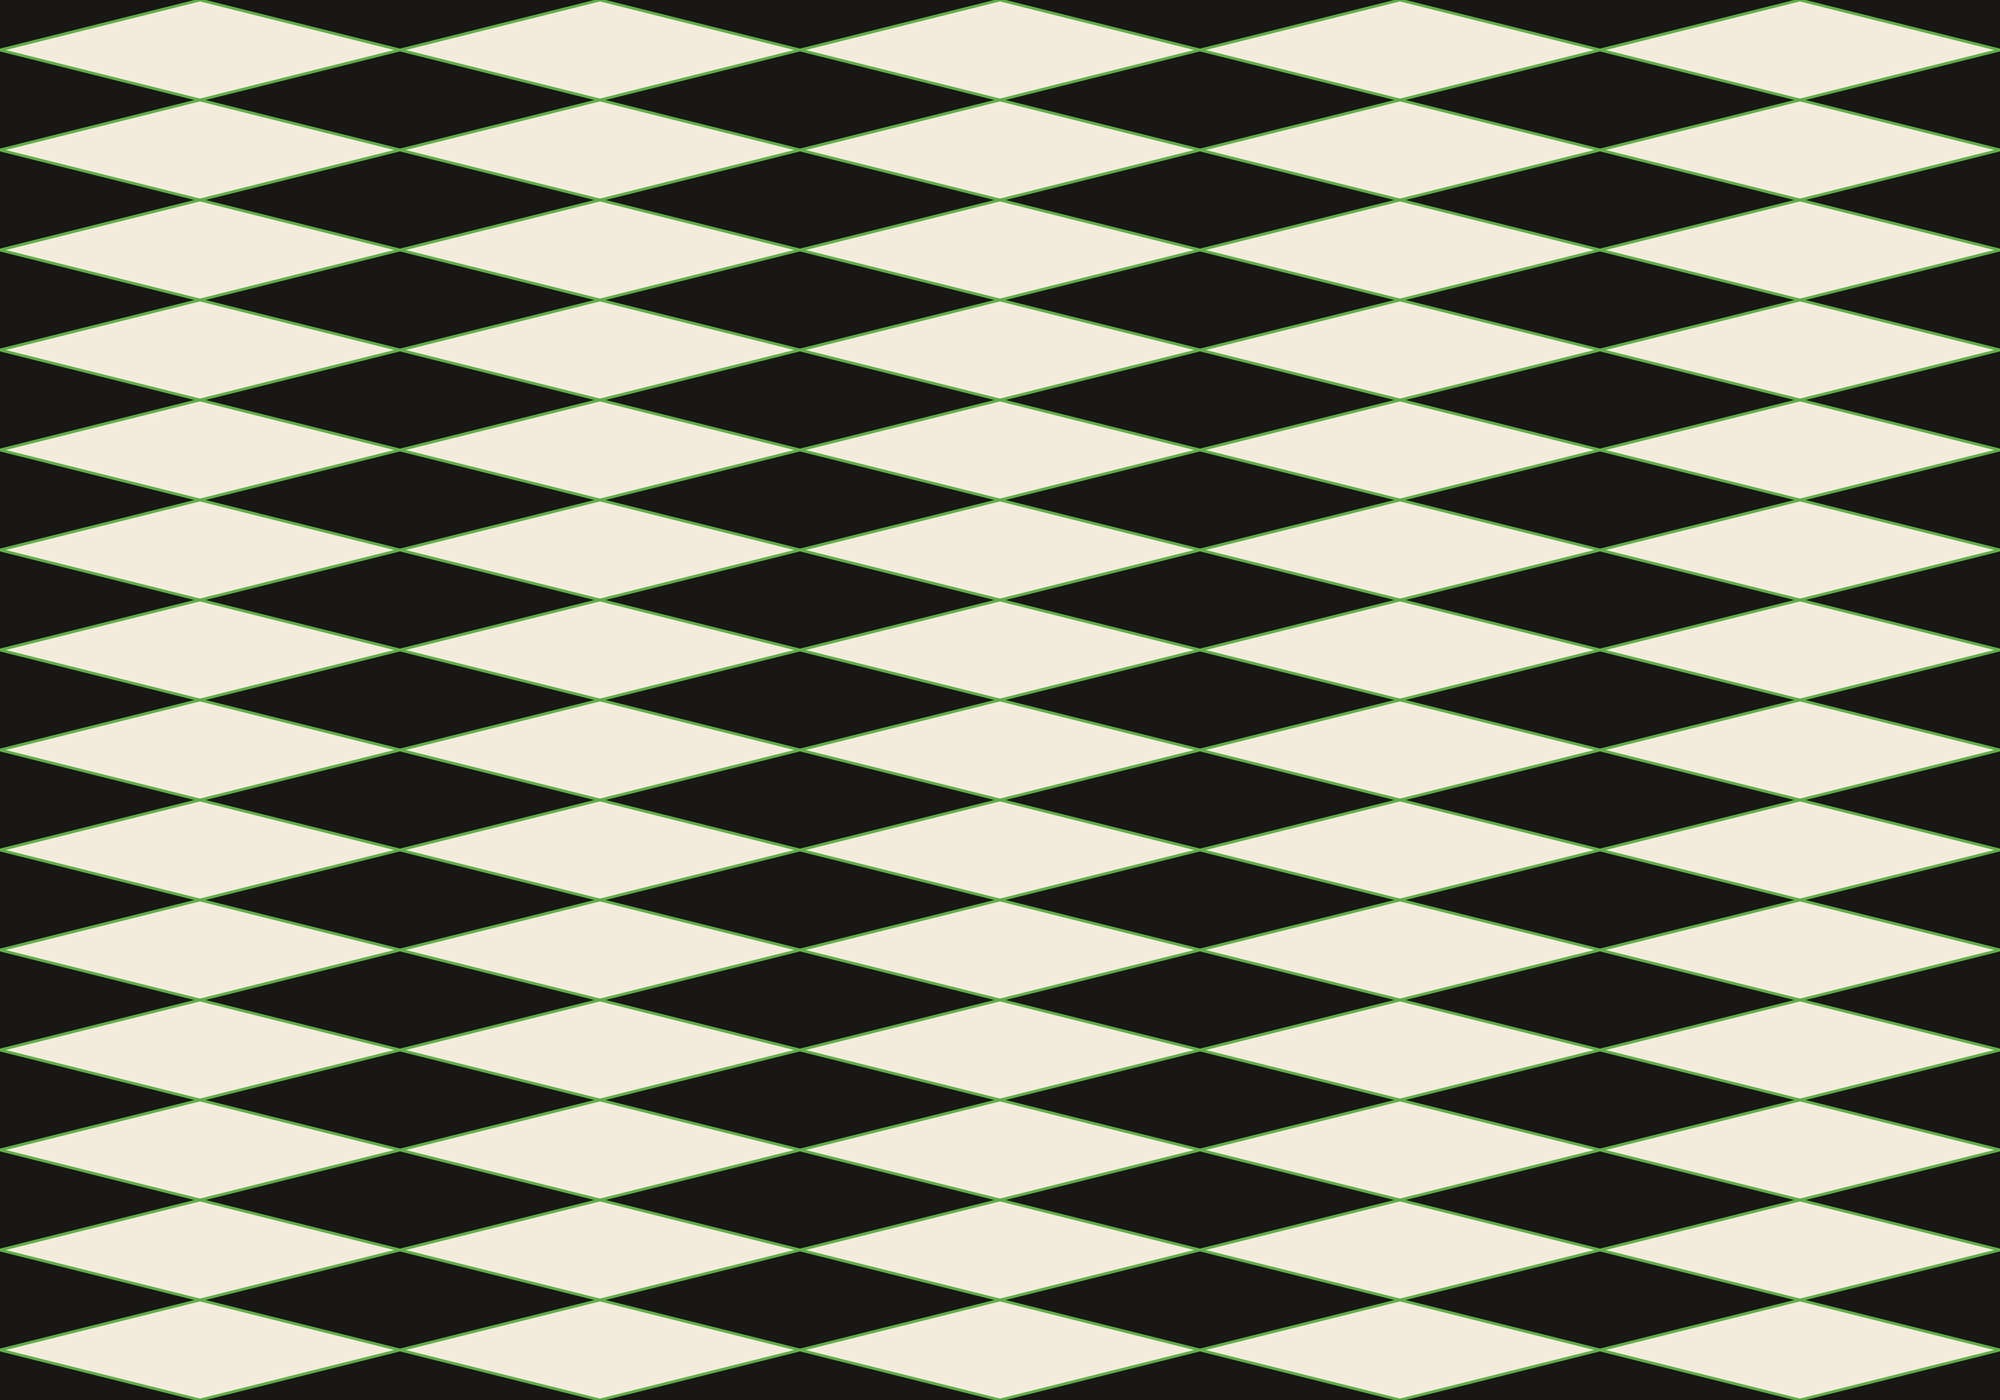             Graphic Wallpaper with Diamonds & Line Patterns - Black, Cream, Green | Pearl Smooth Non-woven
        